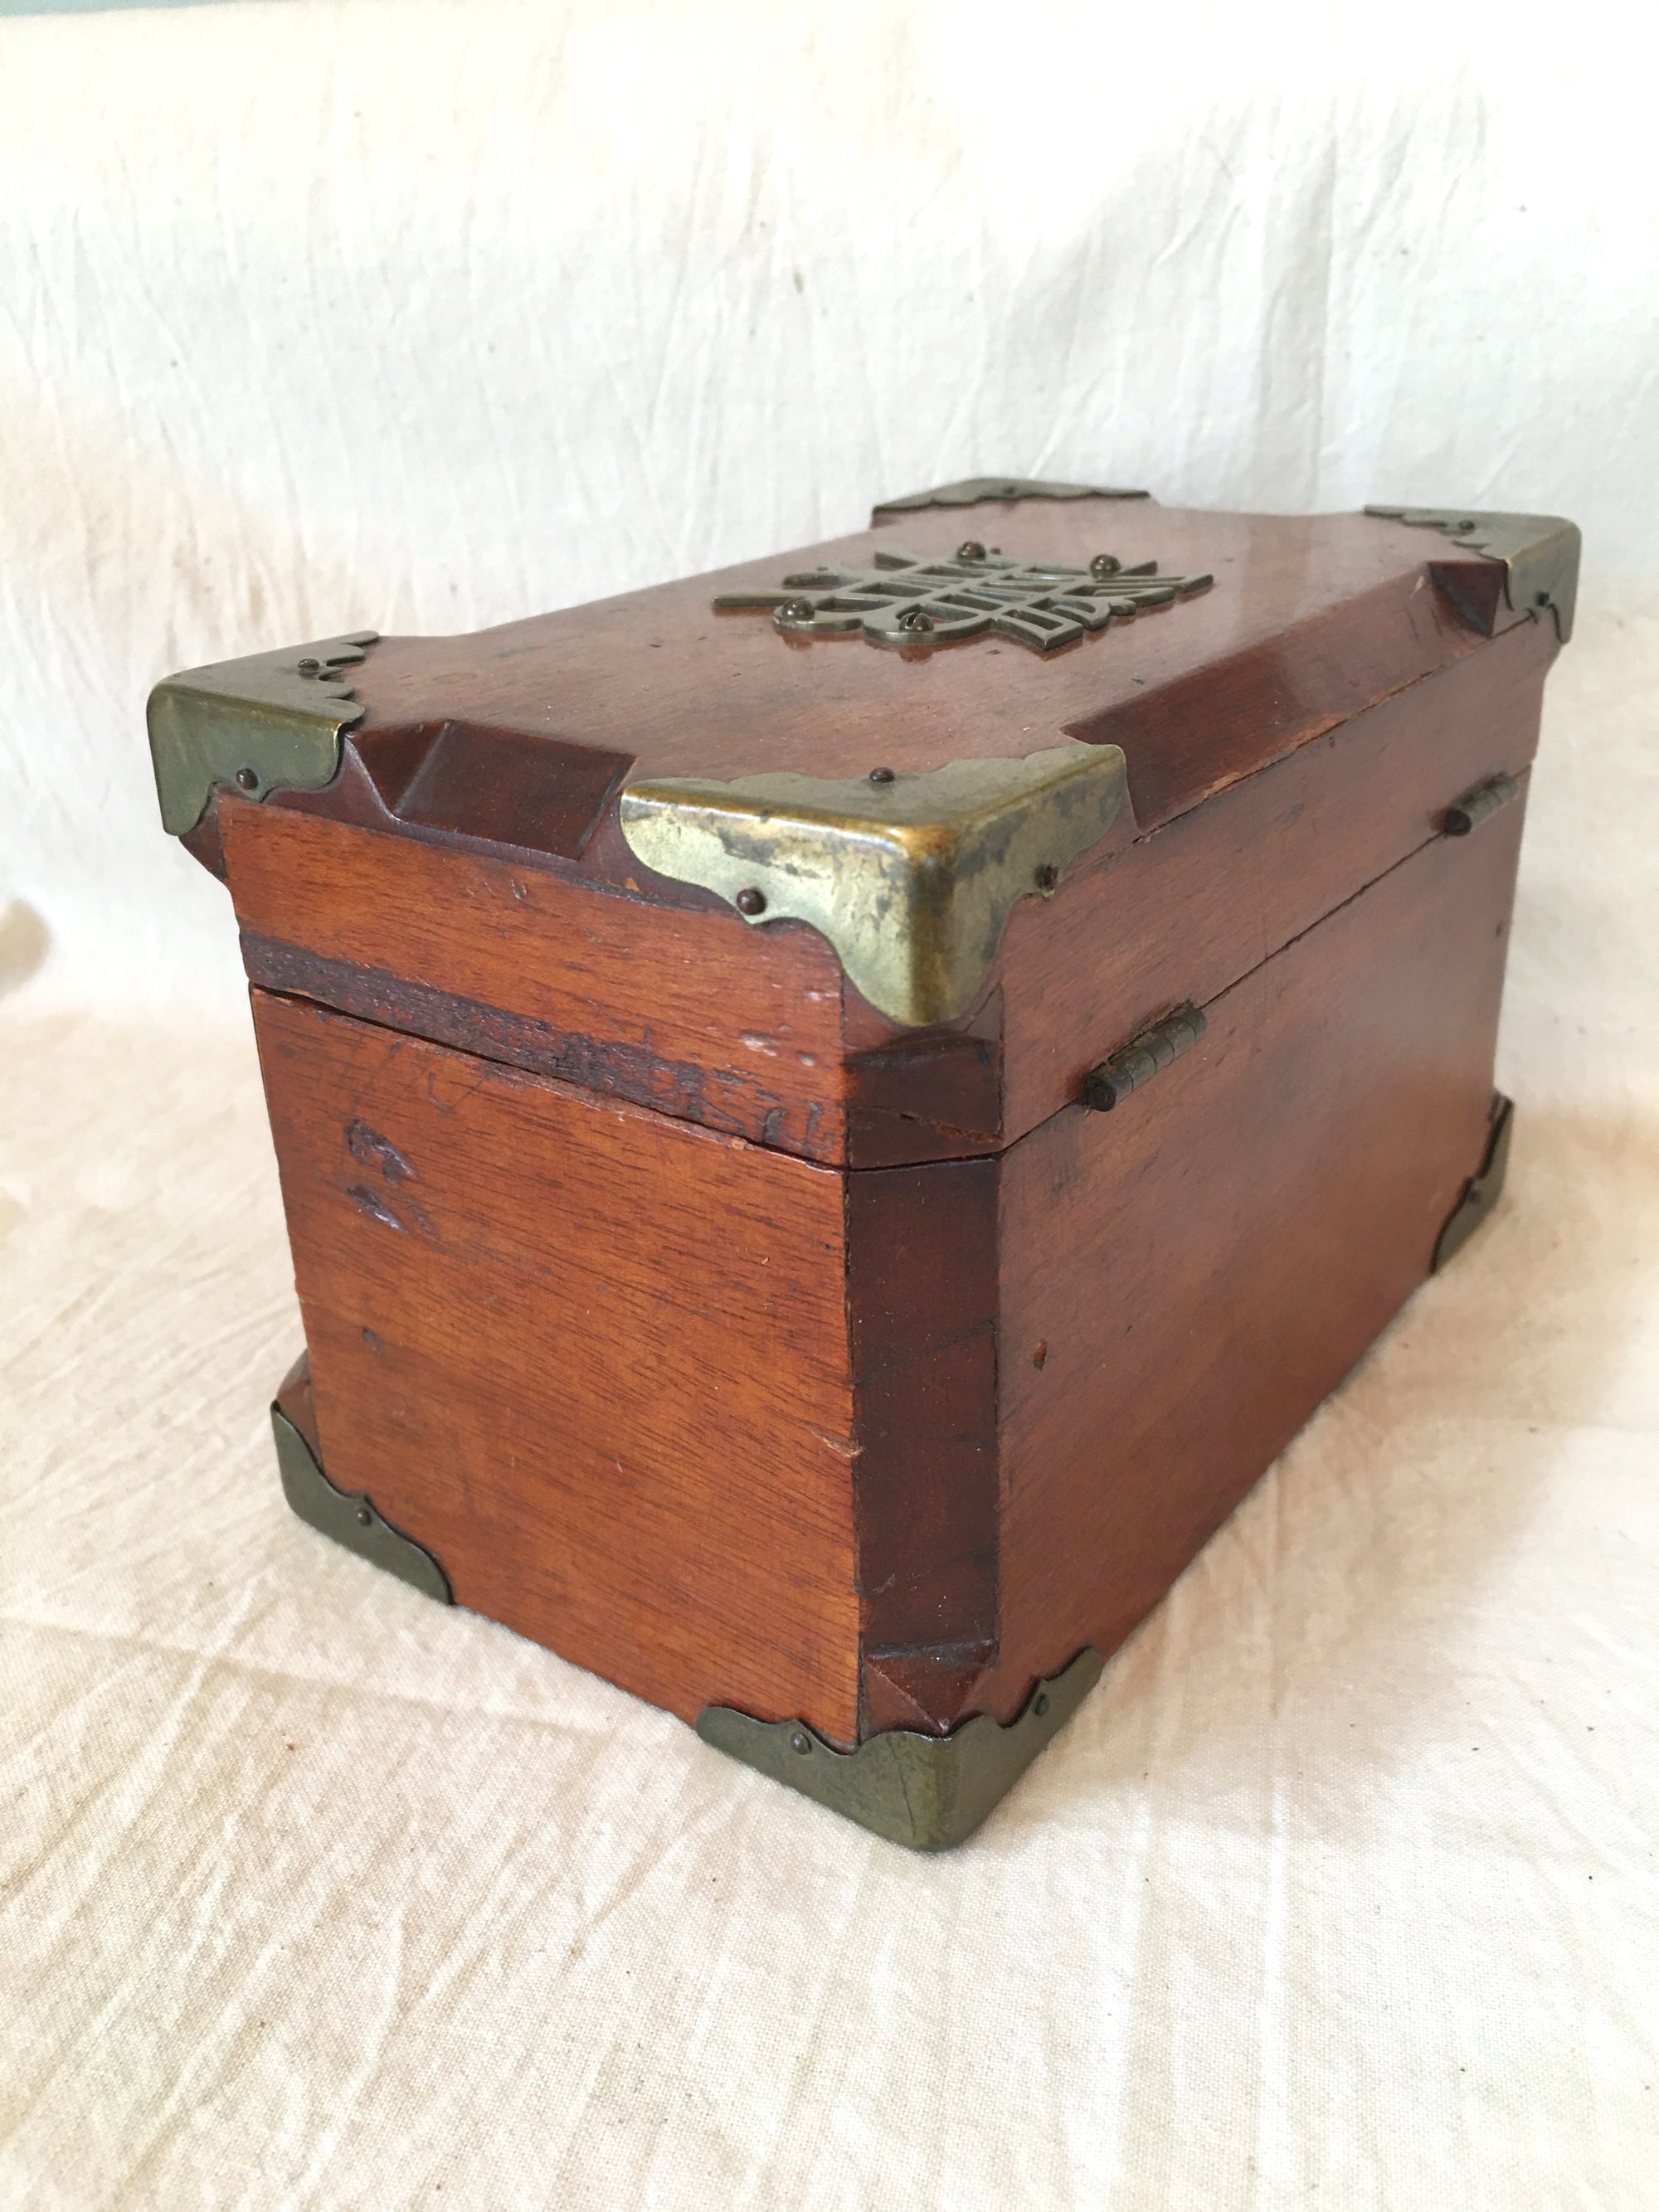 1886 Velvet Lined Jewelry Box with Brass Accents, Key Works!